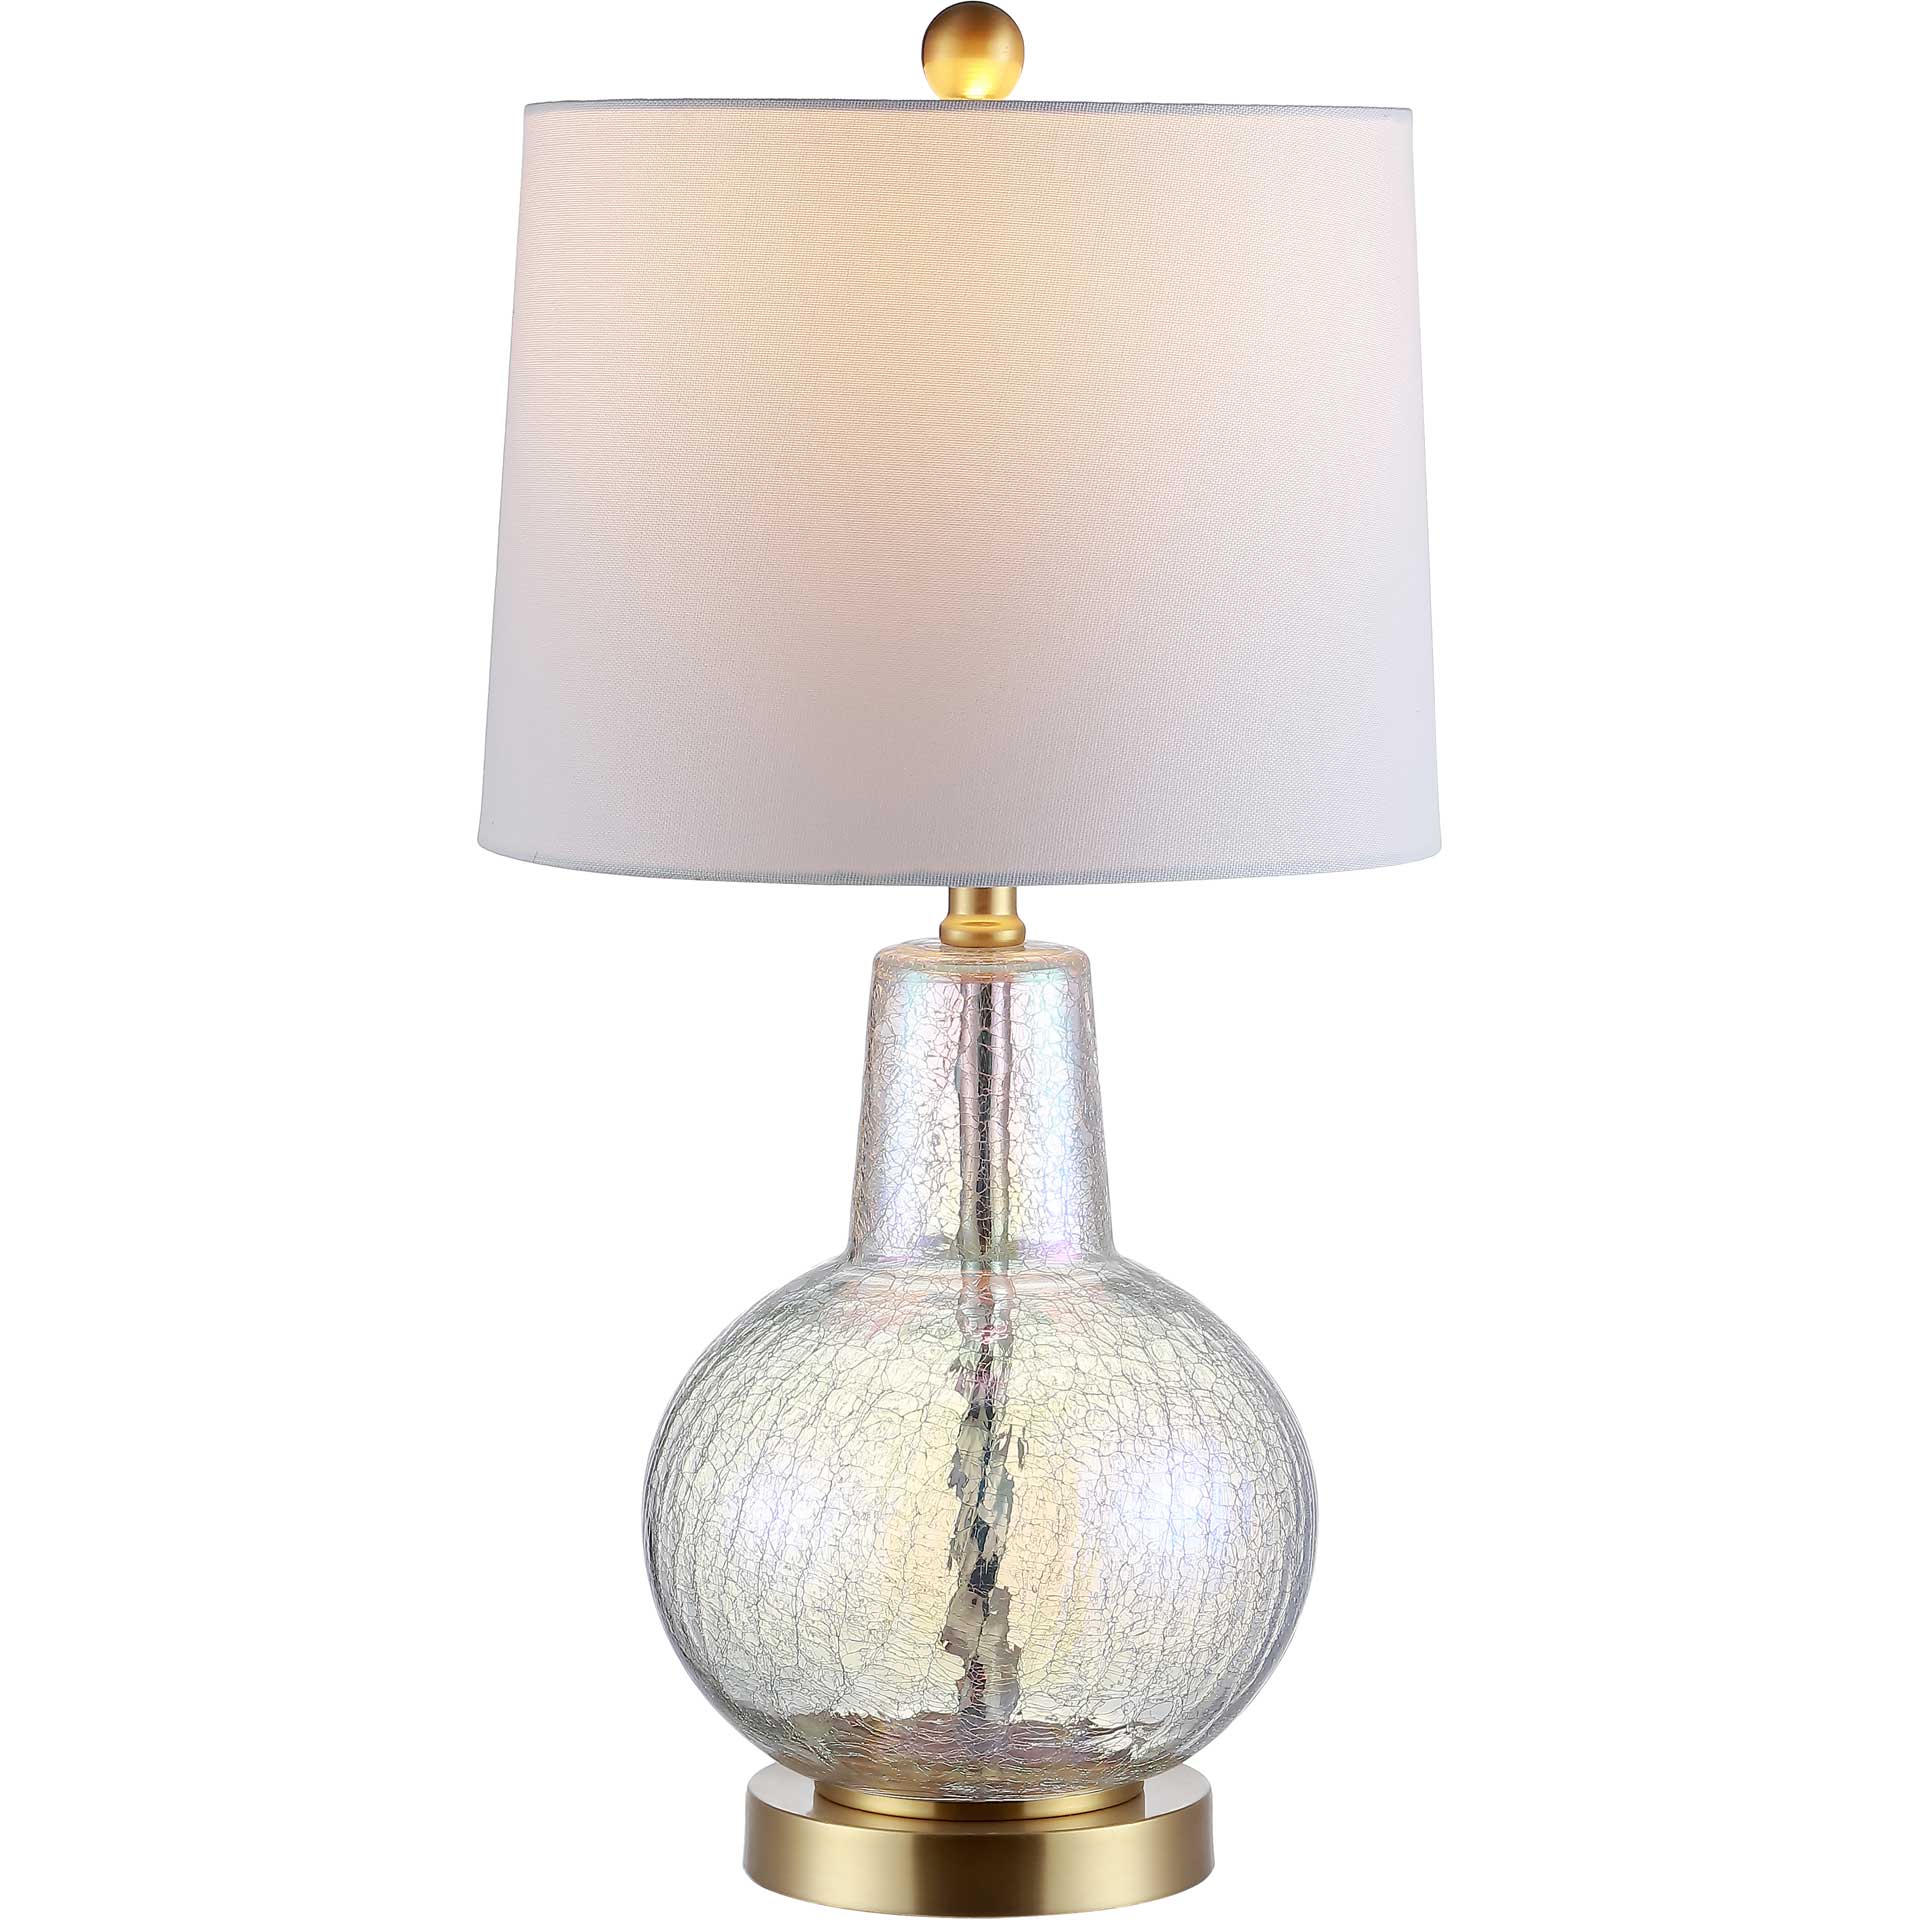 Attune Table Lamp Luster Crackle